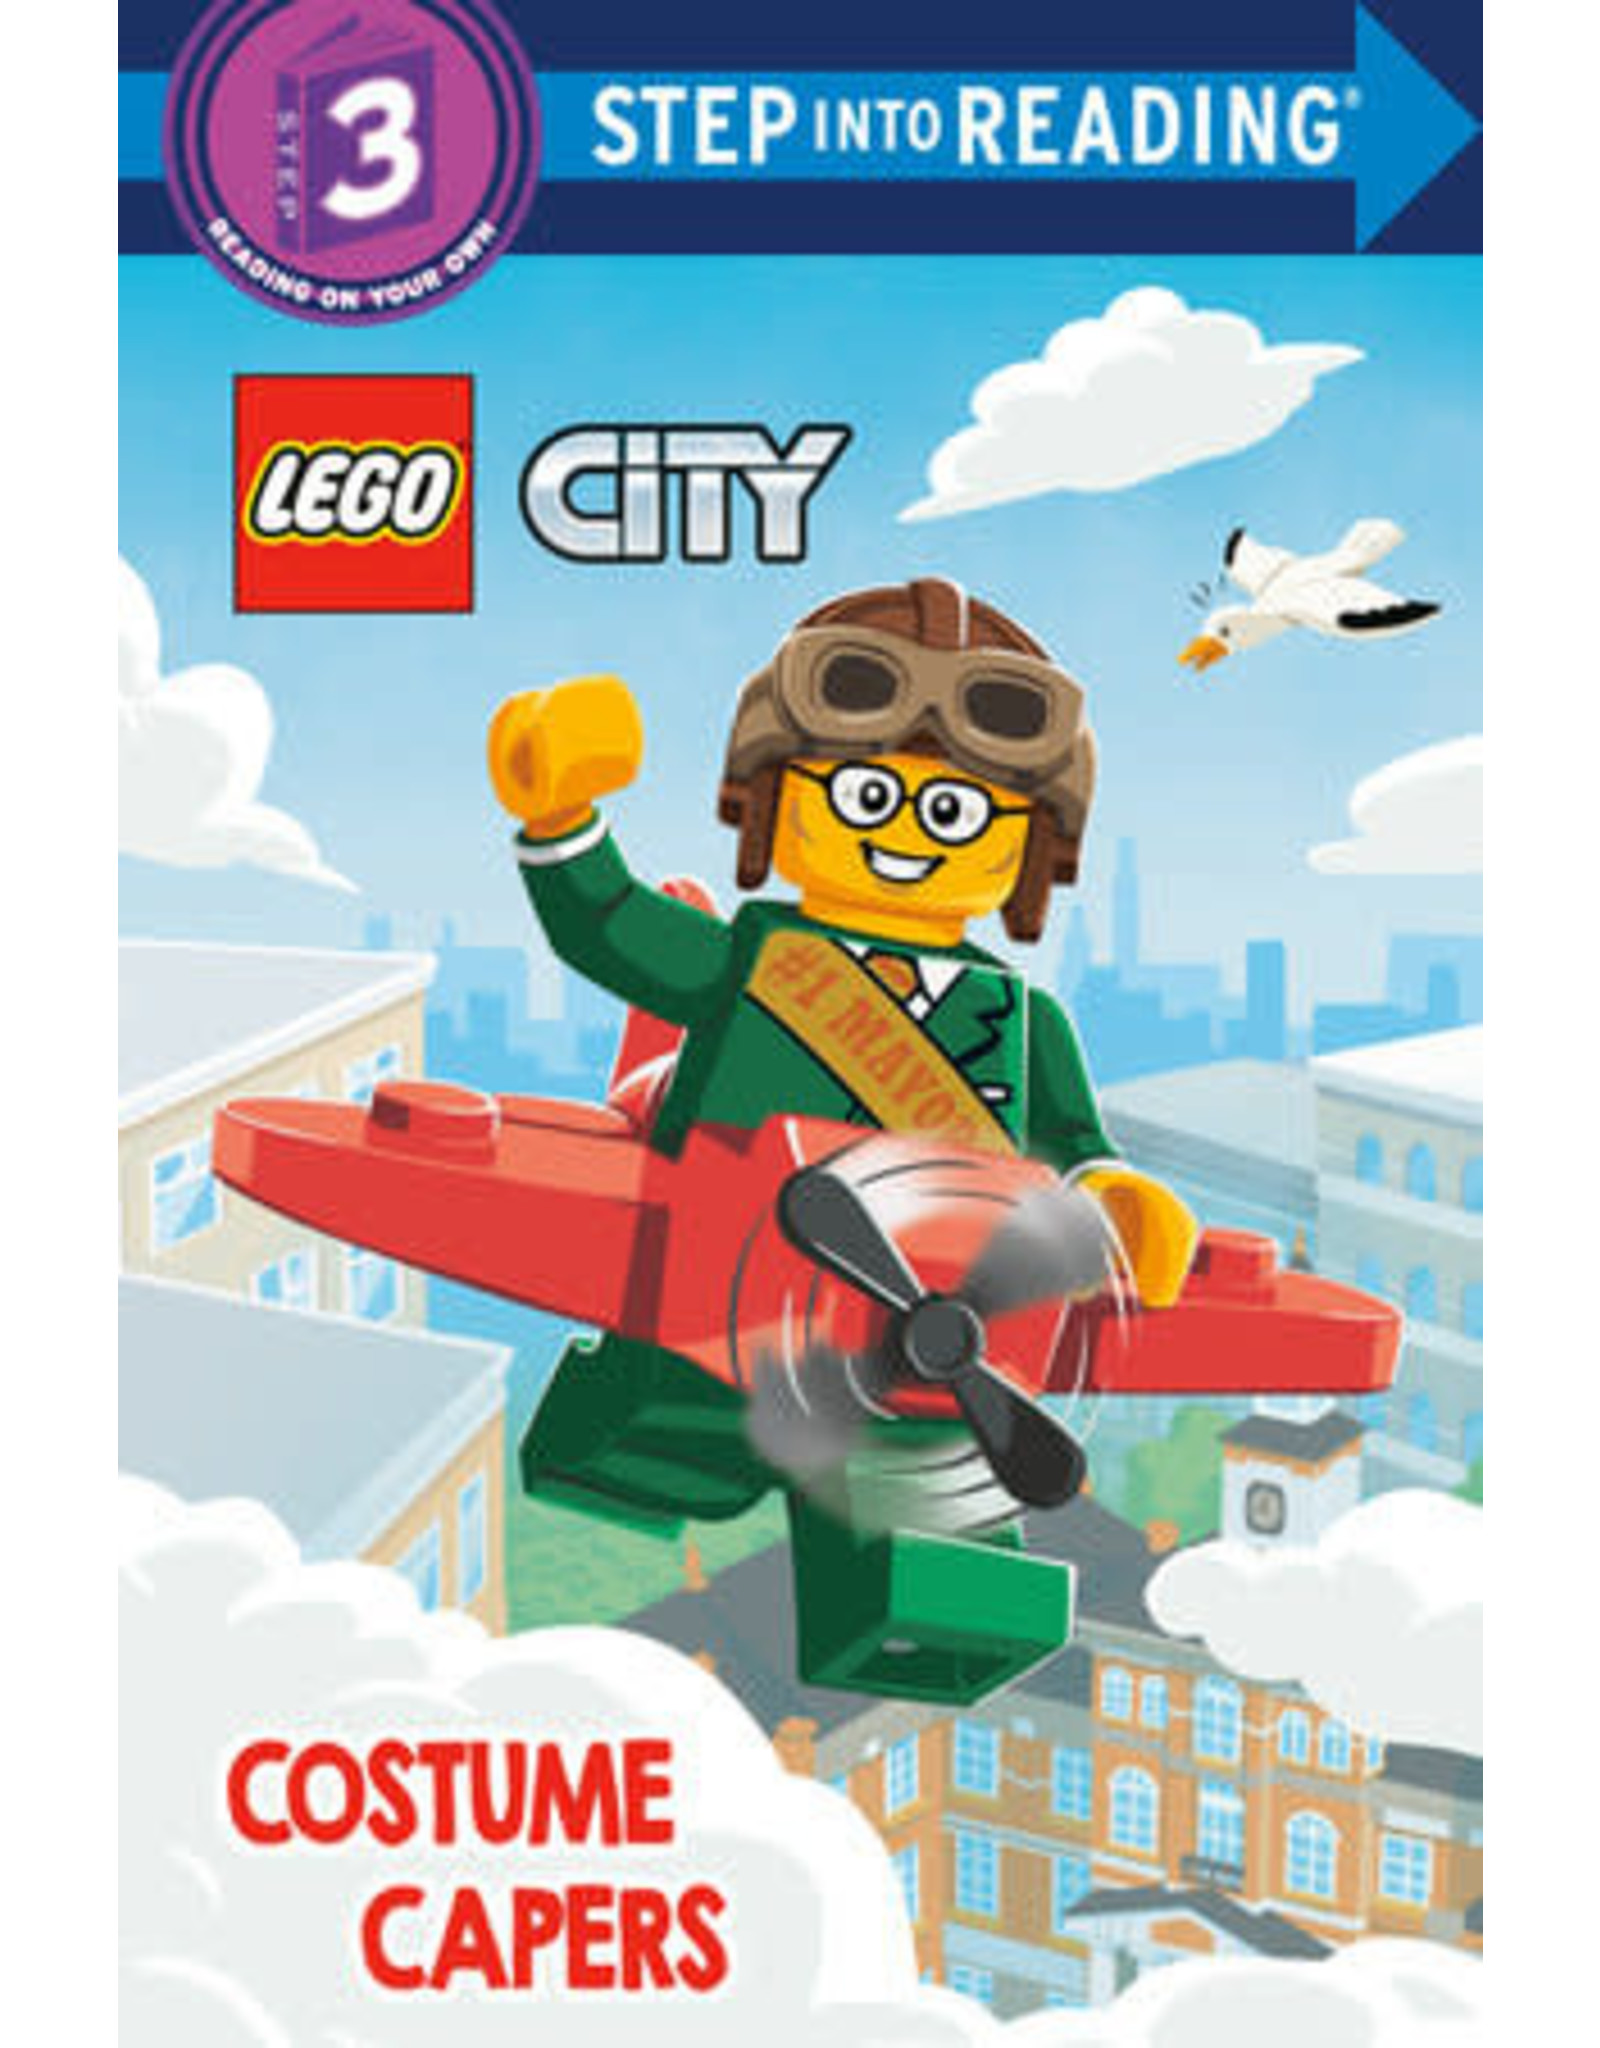 Step Into Reading Step Into Reading - Costume Capers (LEGO City) (Step 3)